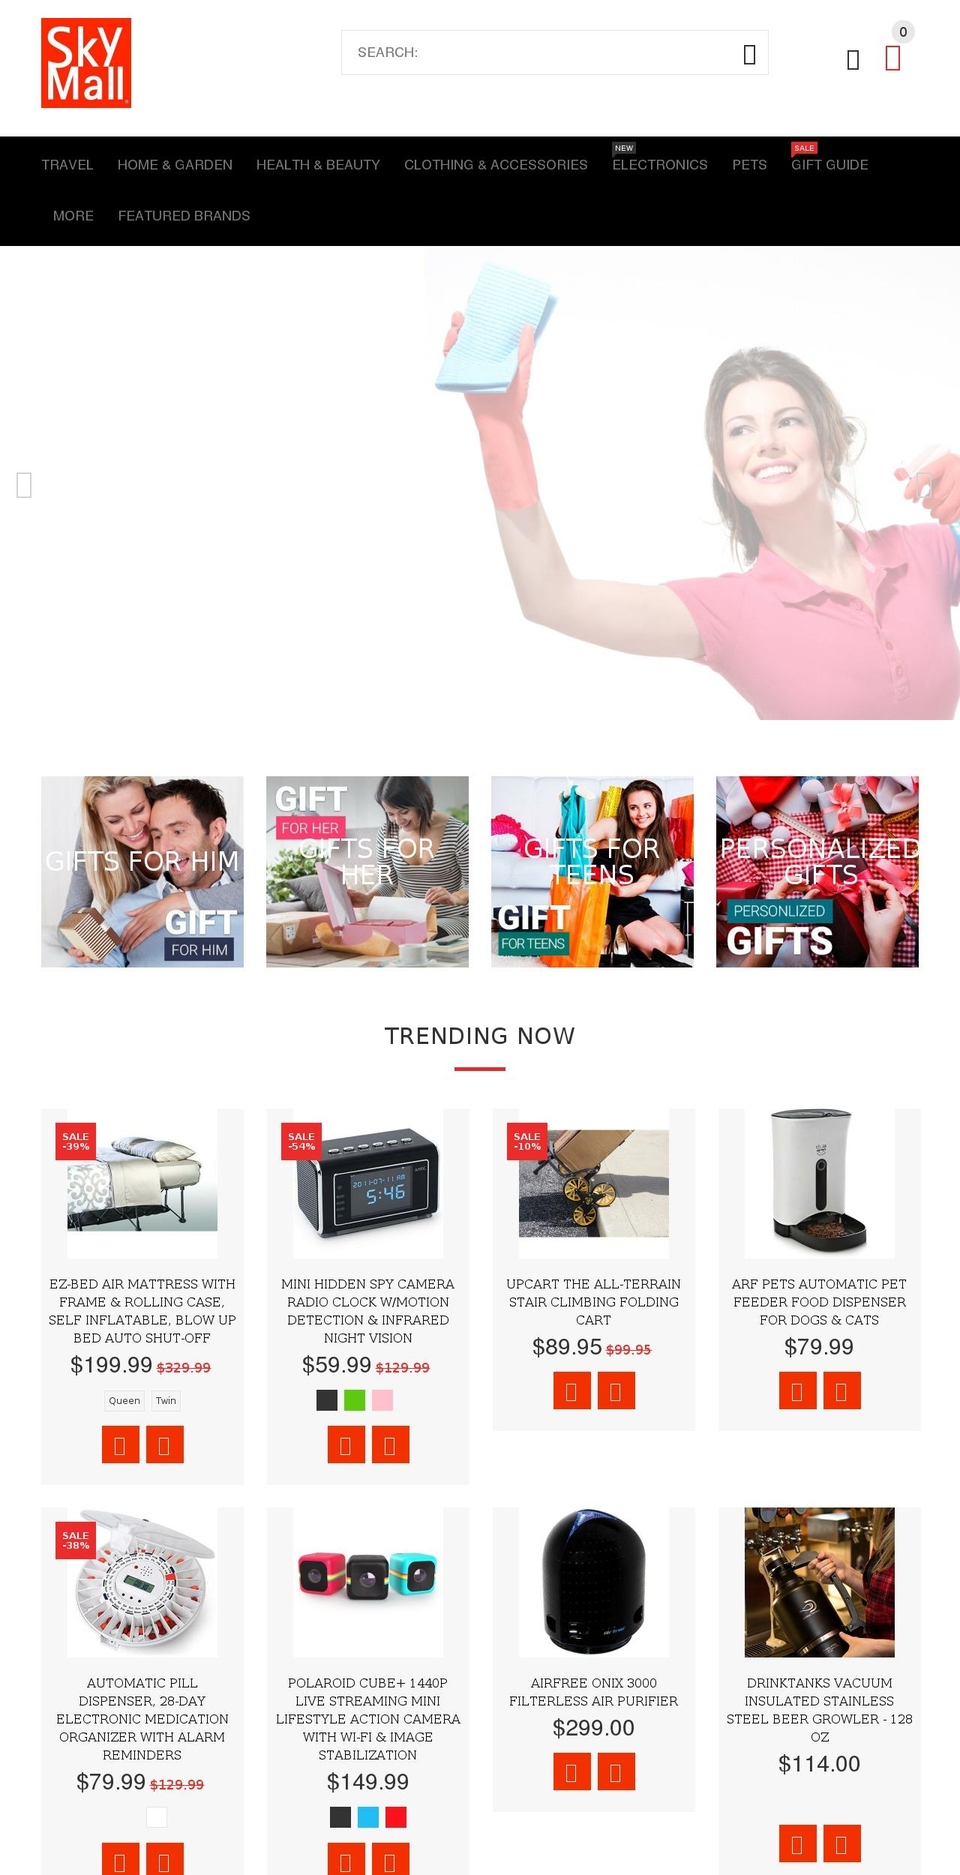 YourStore-V2-0-1A Shopify theme site example skymalltv.org